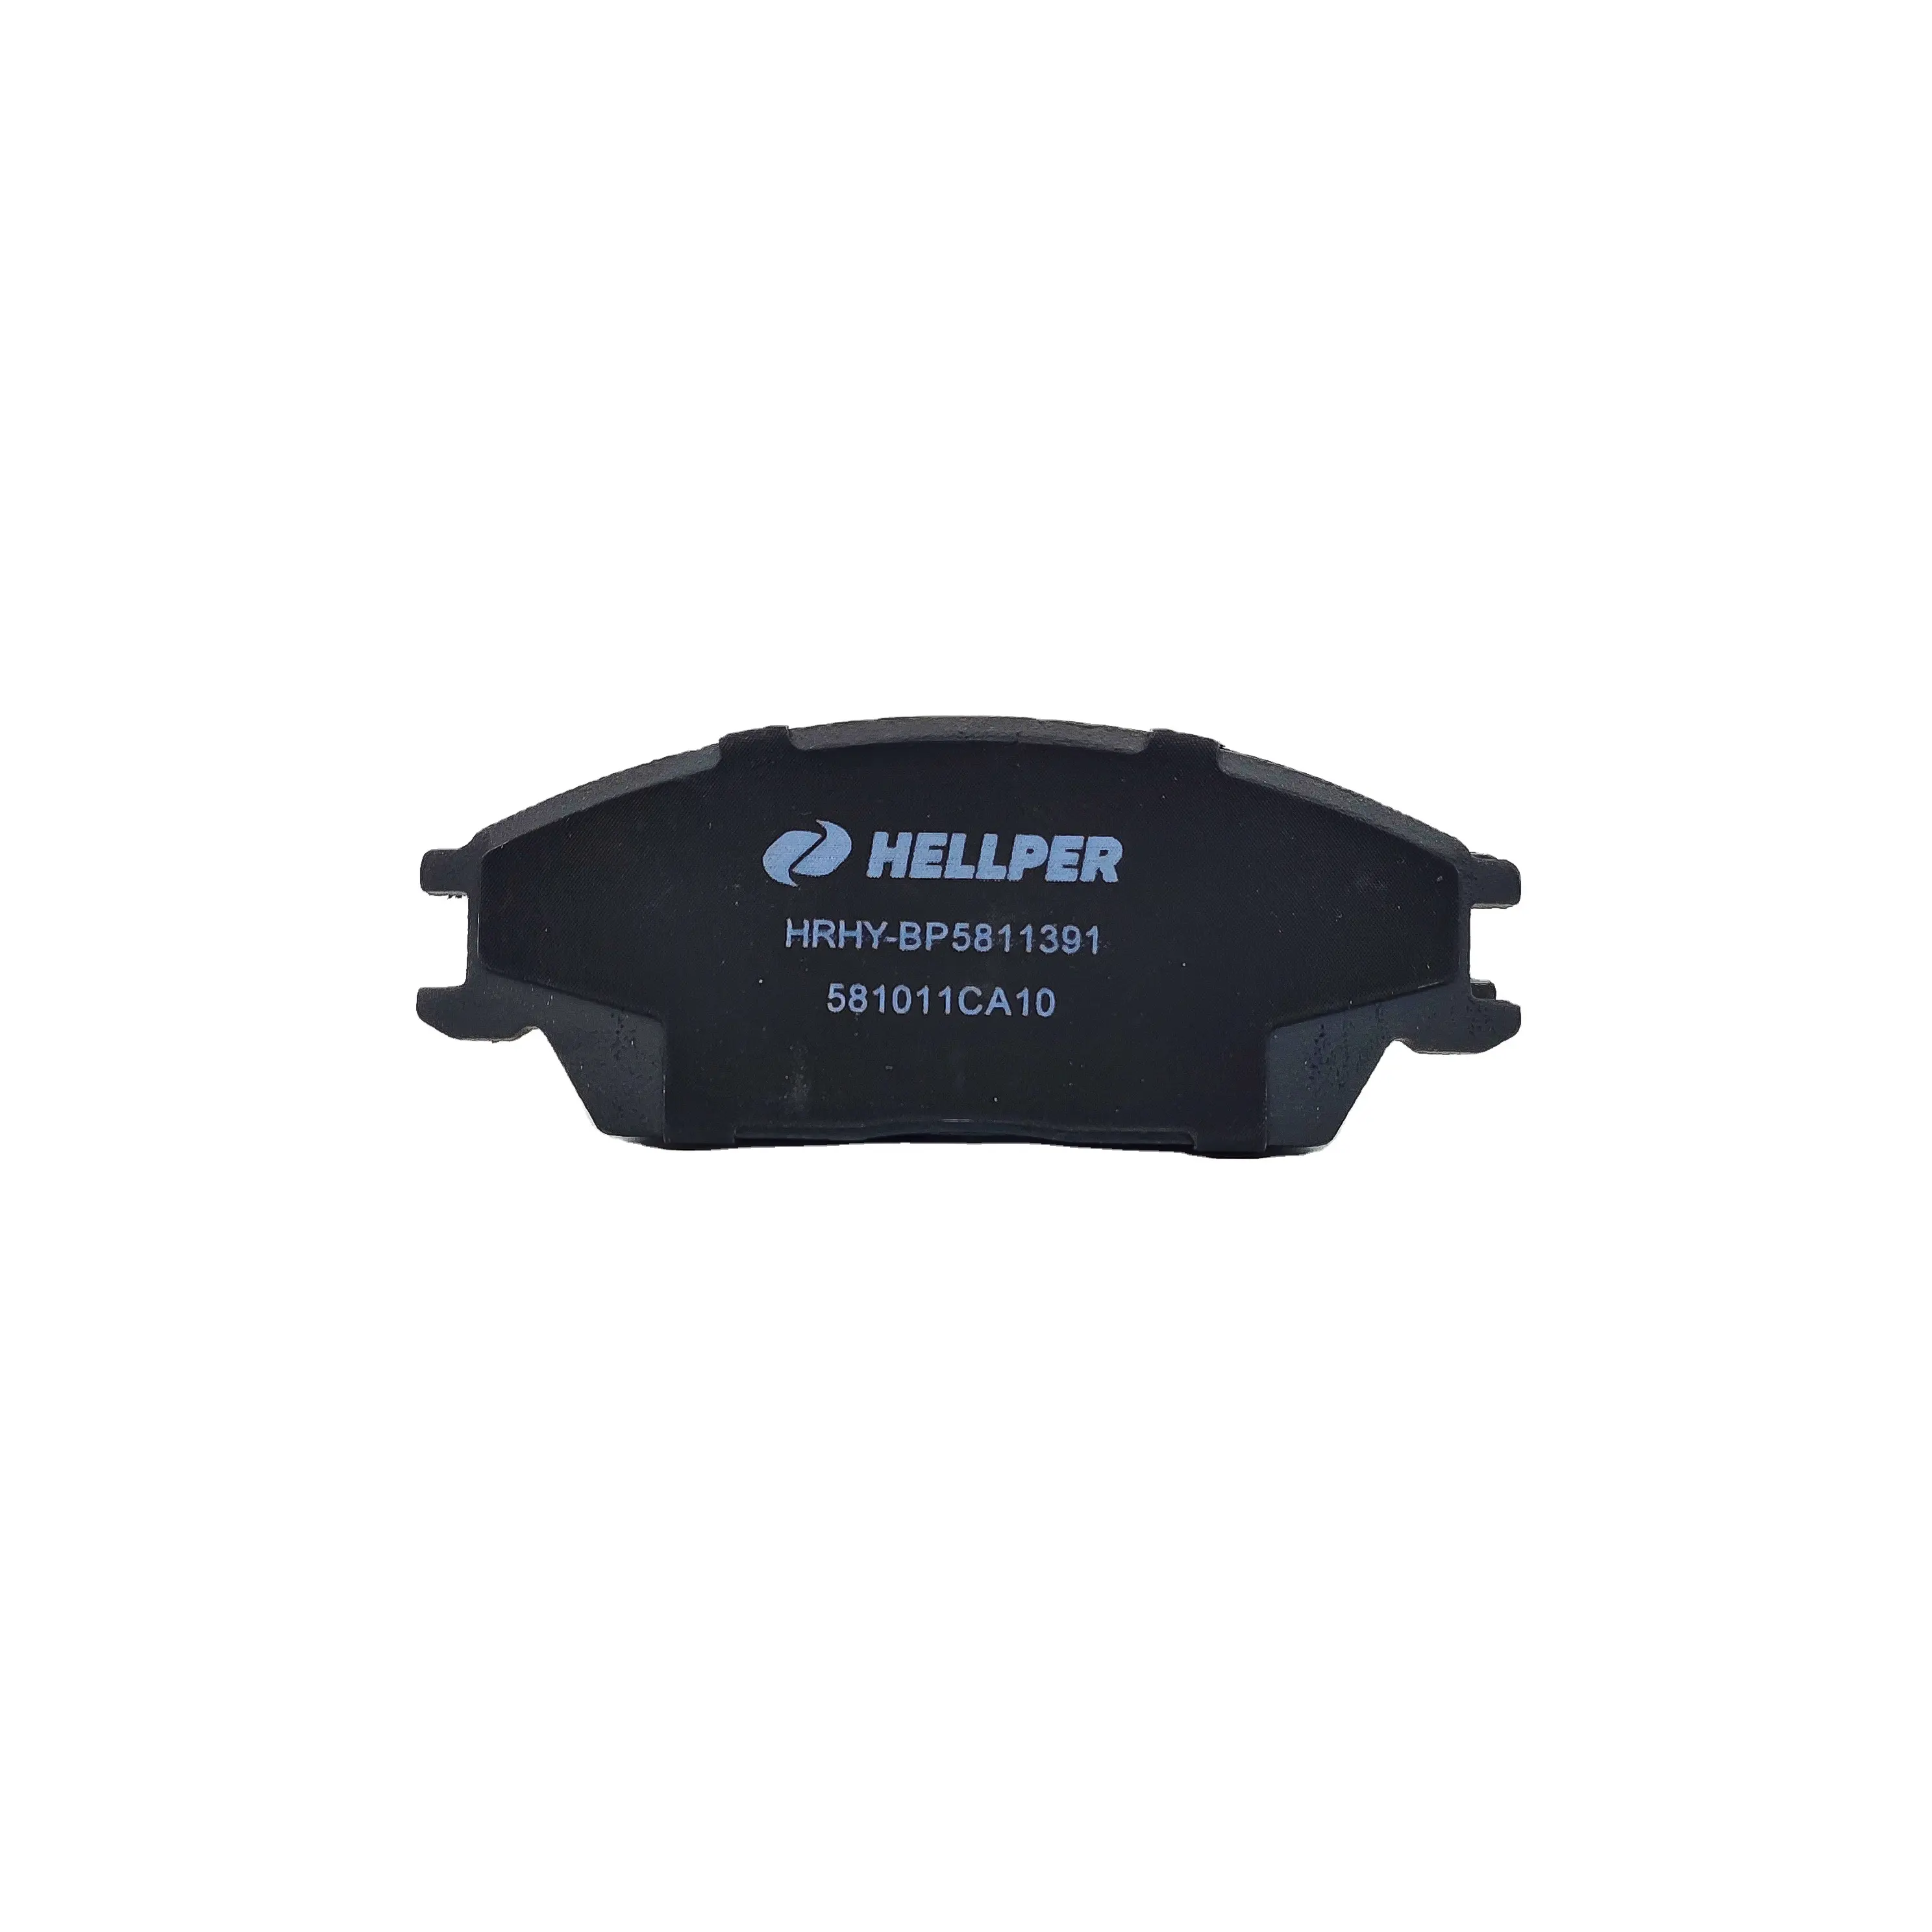 OEM Brake Pads 581011CA10 for Hyundai Lantra, Accent, Getz by HELLPER